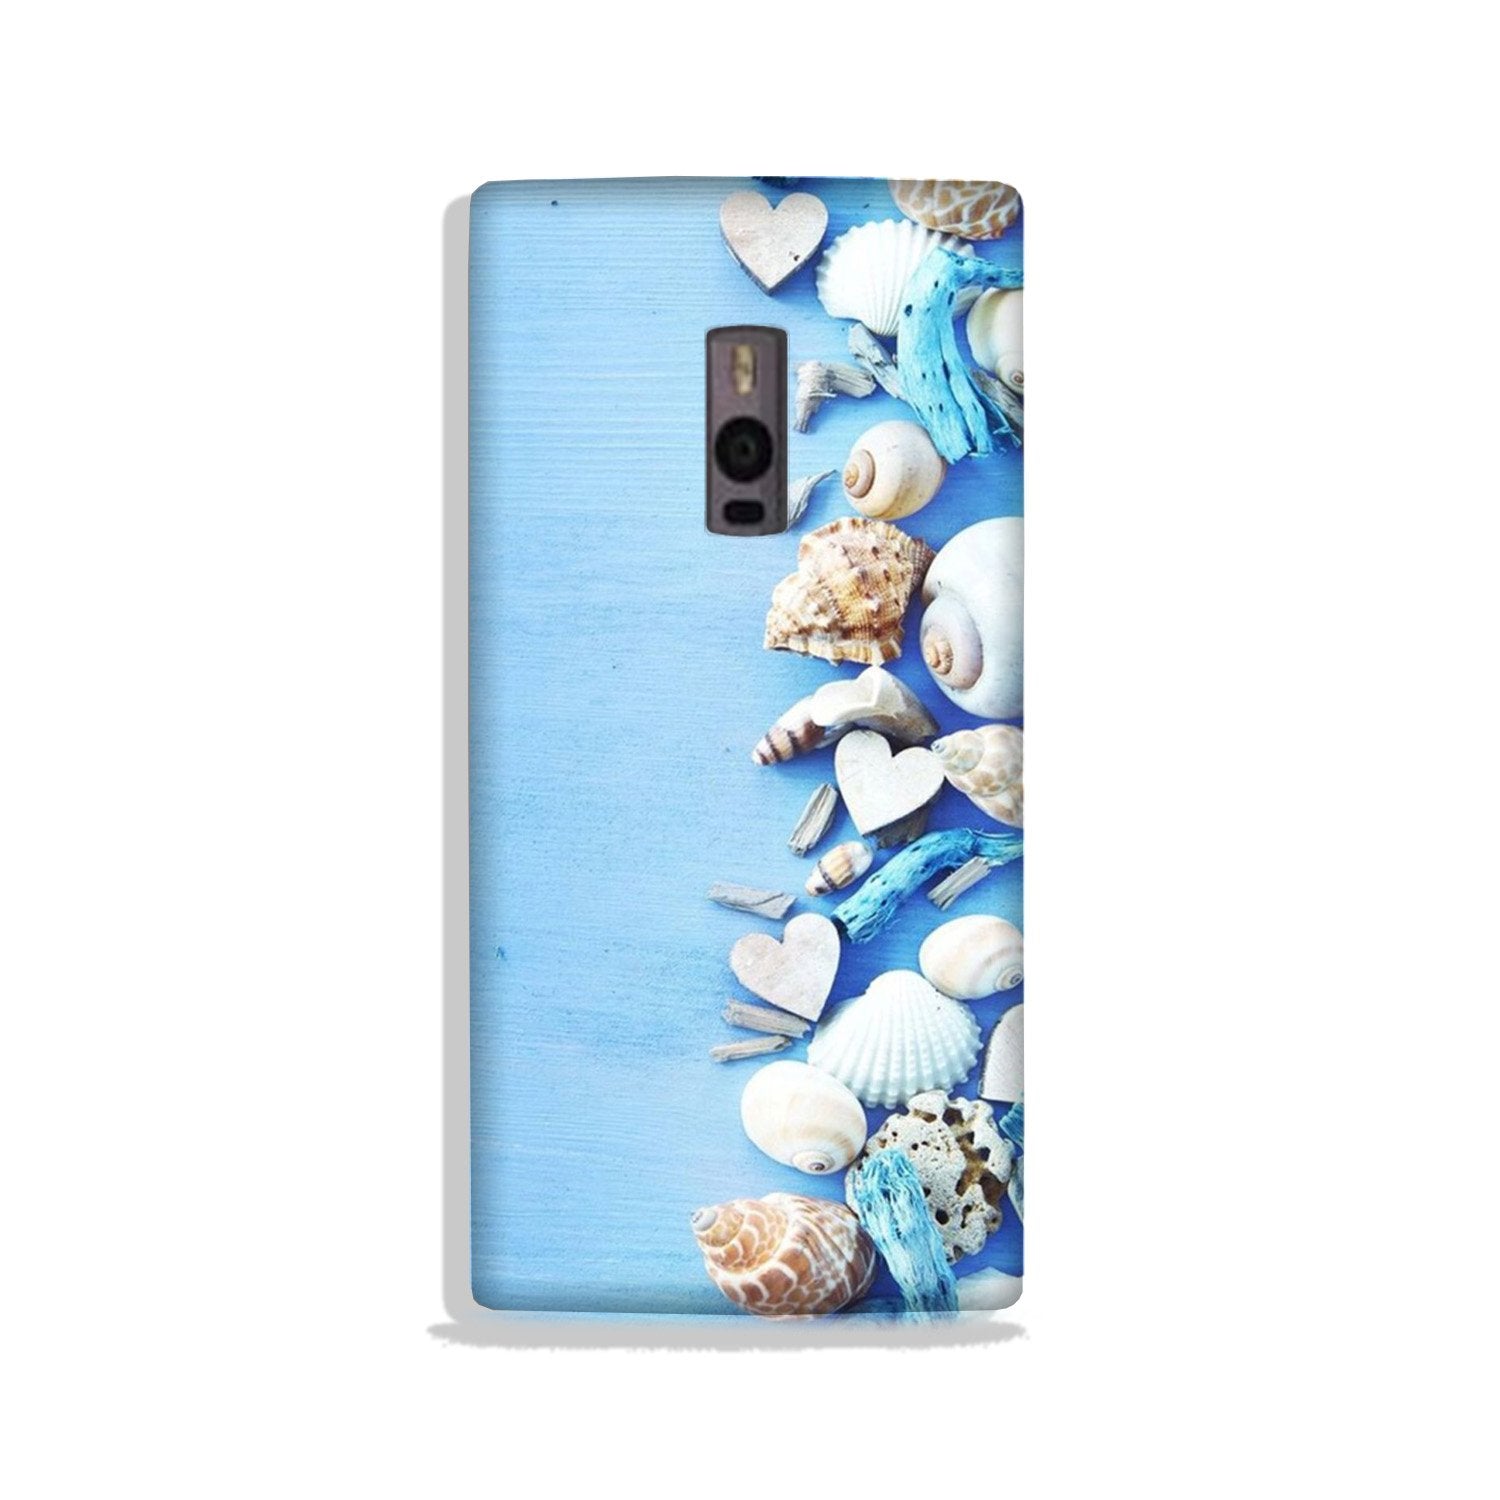 Sea Shells2 Case for OnePlus 2